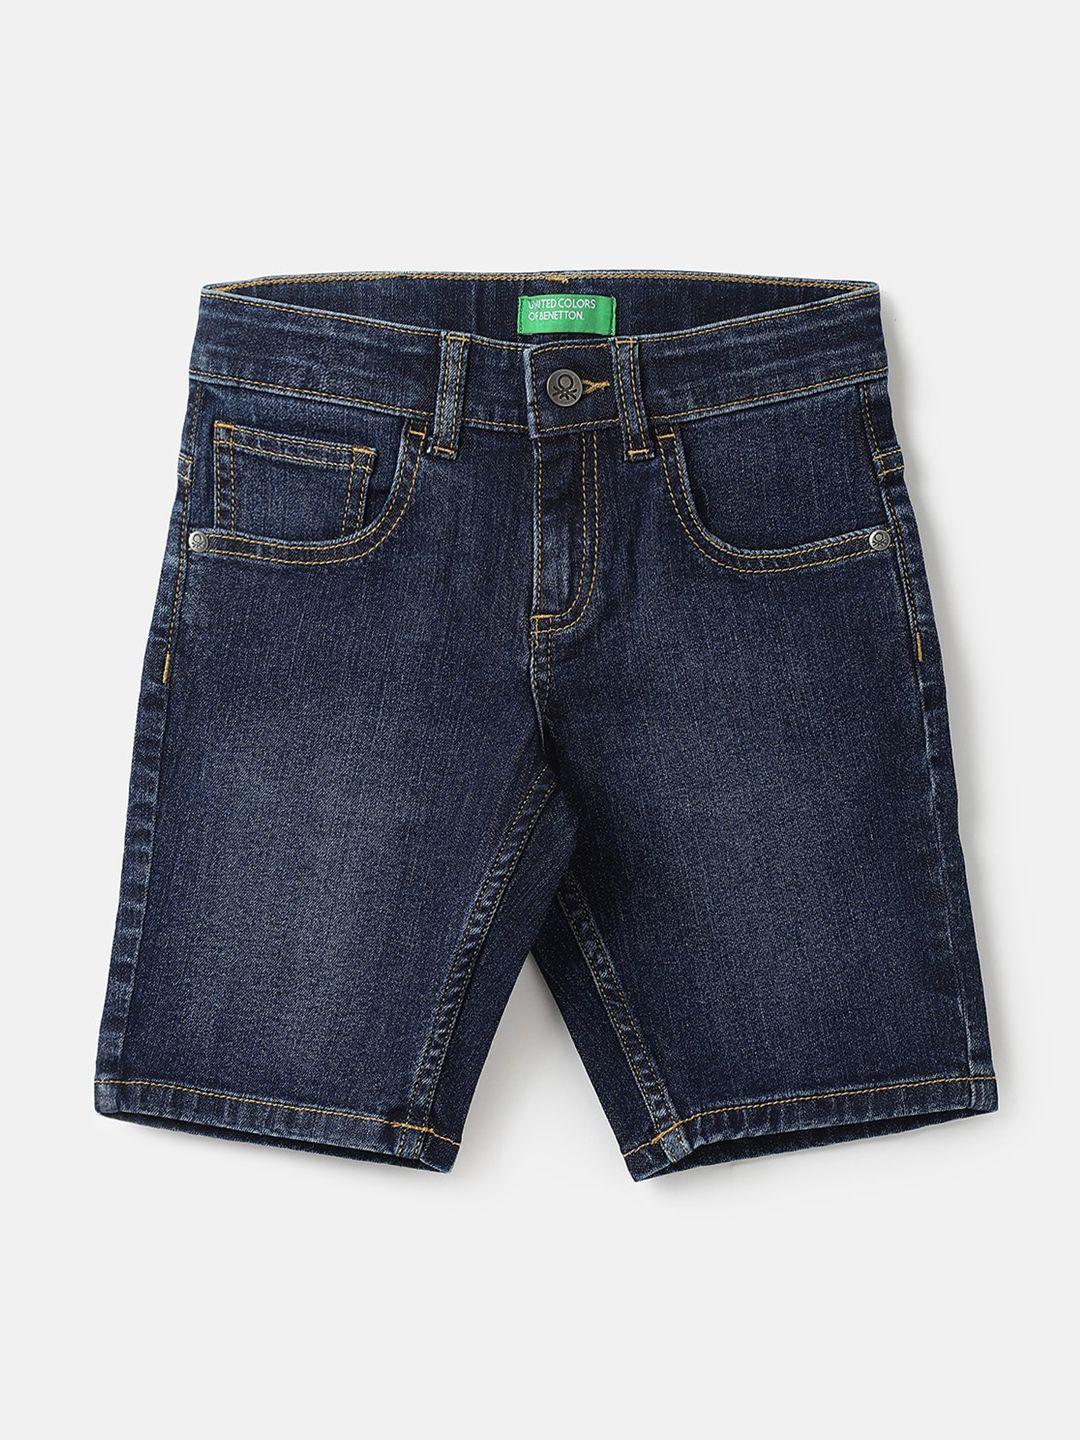 united-colors-of-benetton-boys-regular-fit-washed-cotton-denim-shorts